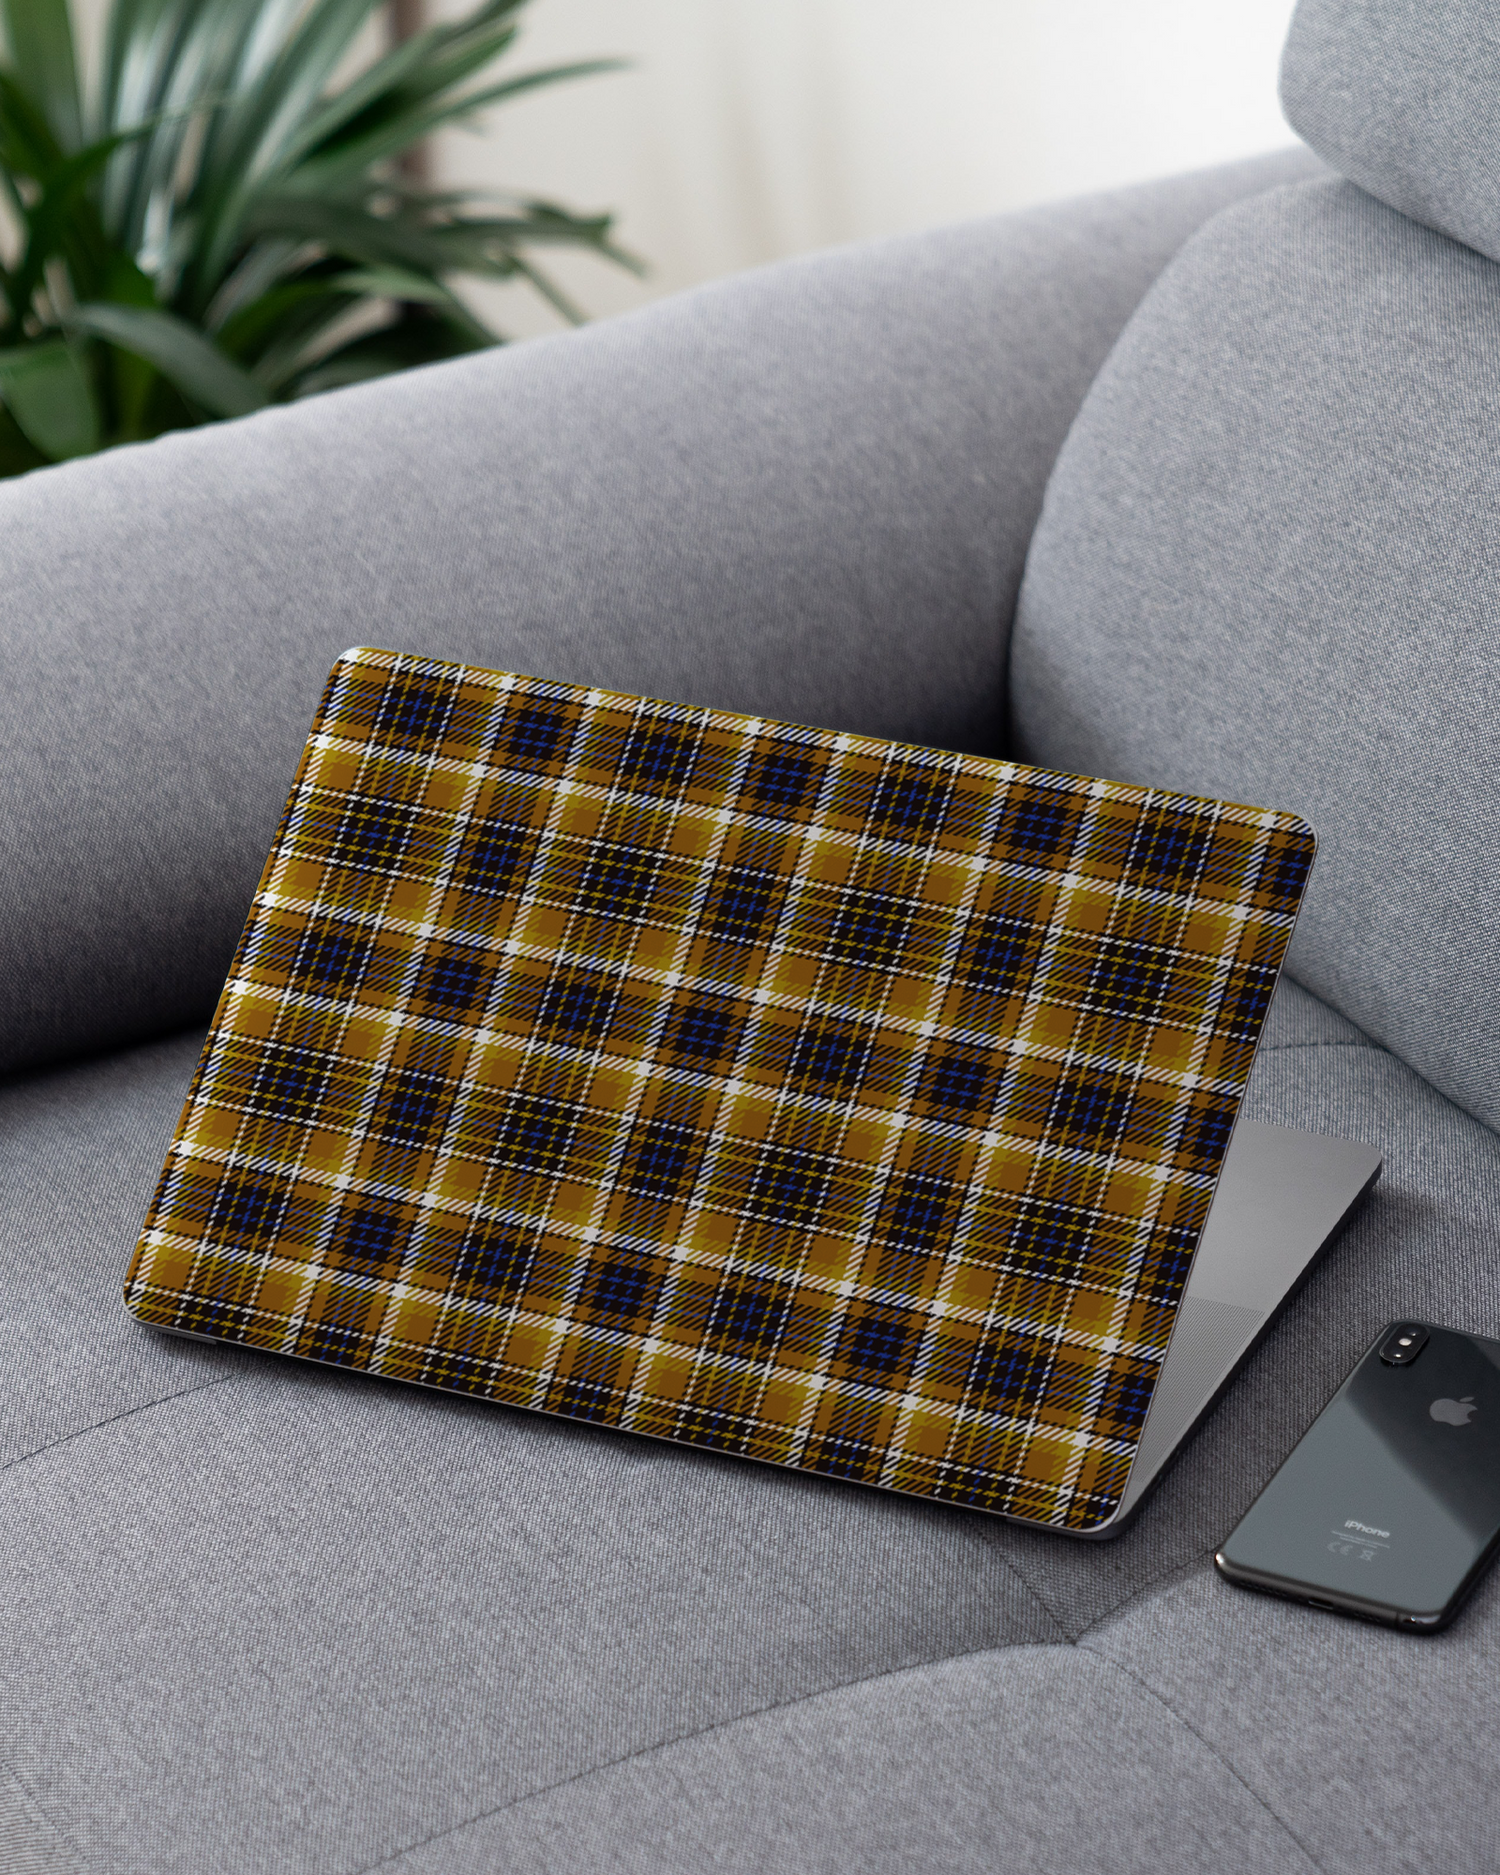 Autumn Country Plaid Laptop Skin for 13 inch Apple MacBooks on a couch